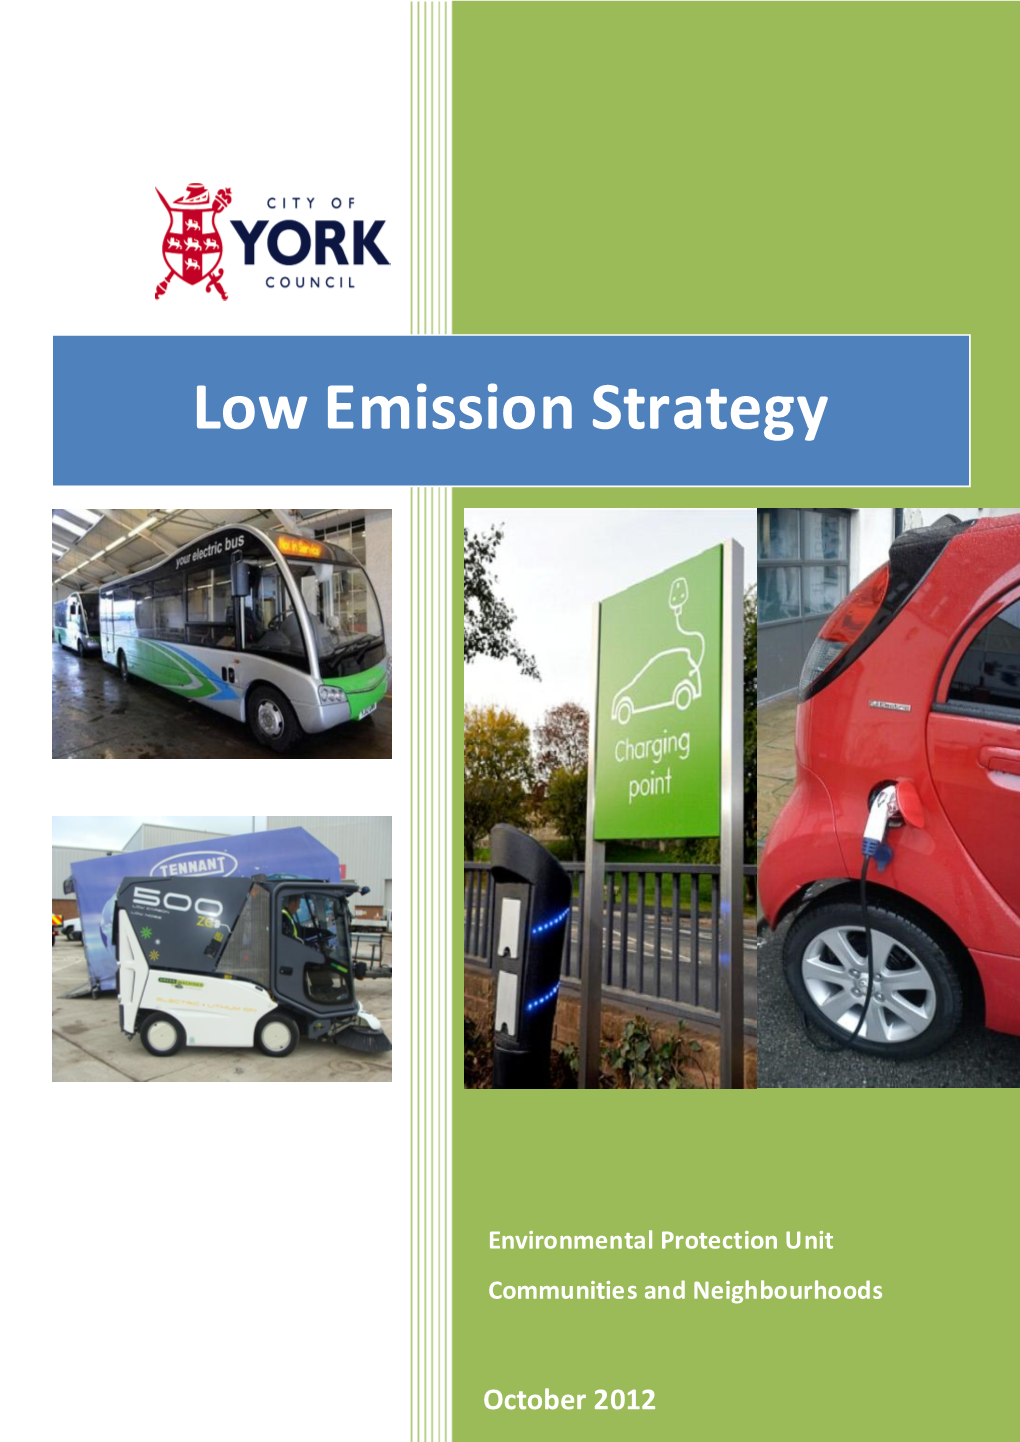 City of York Draft Low Emission Strategy